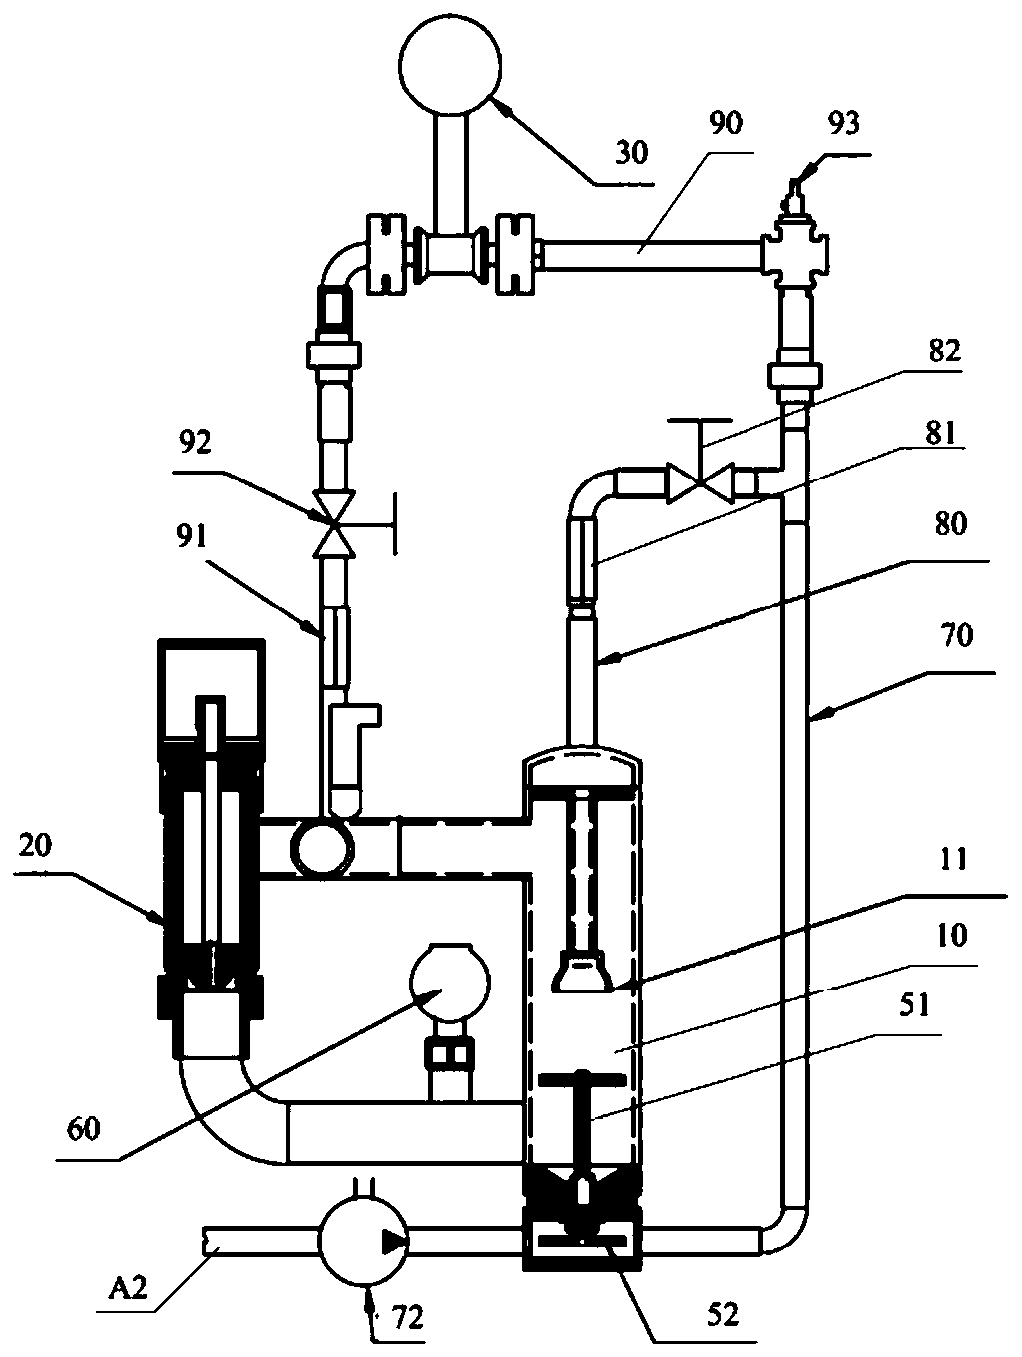 Oil well monitoring device and method